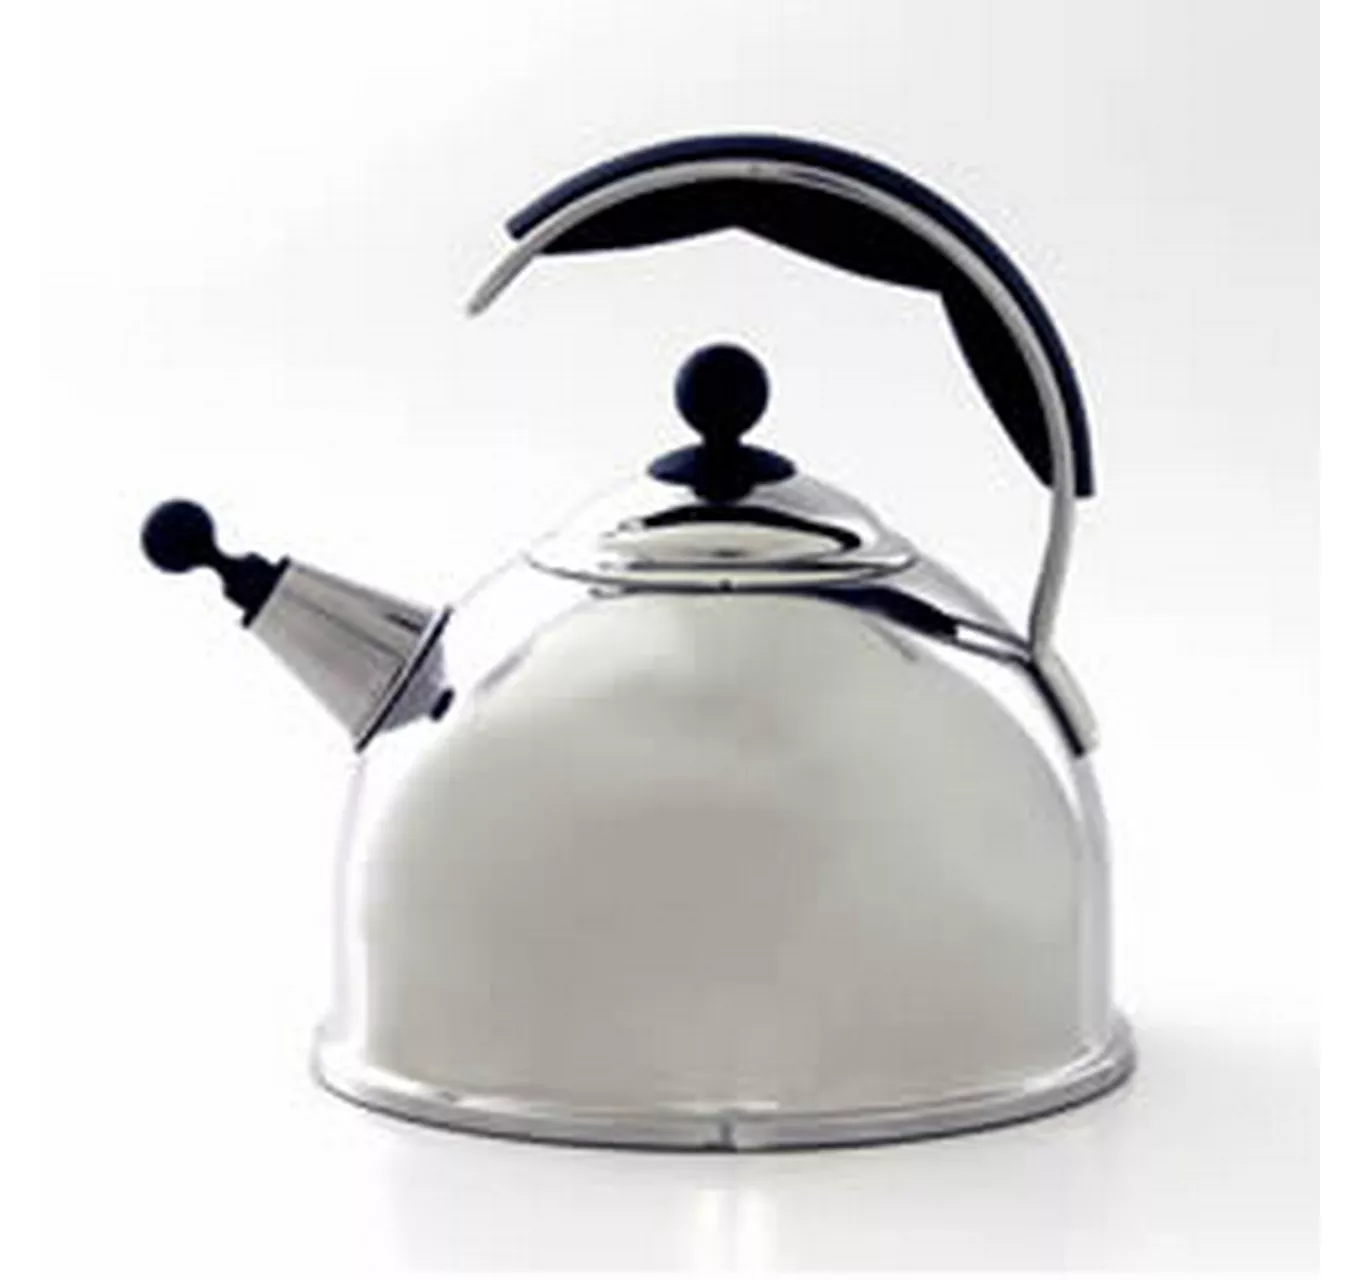 AGA Stainless Steel Whistling Kettle - Polished